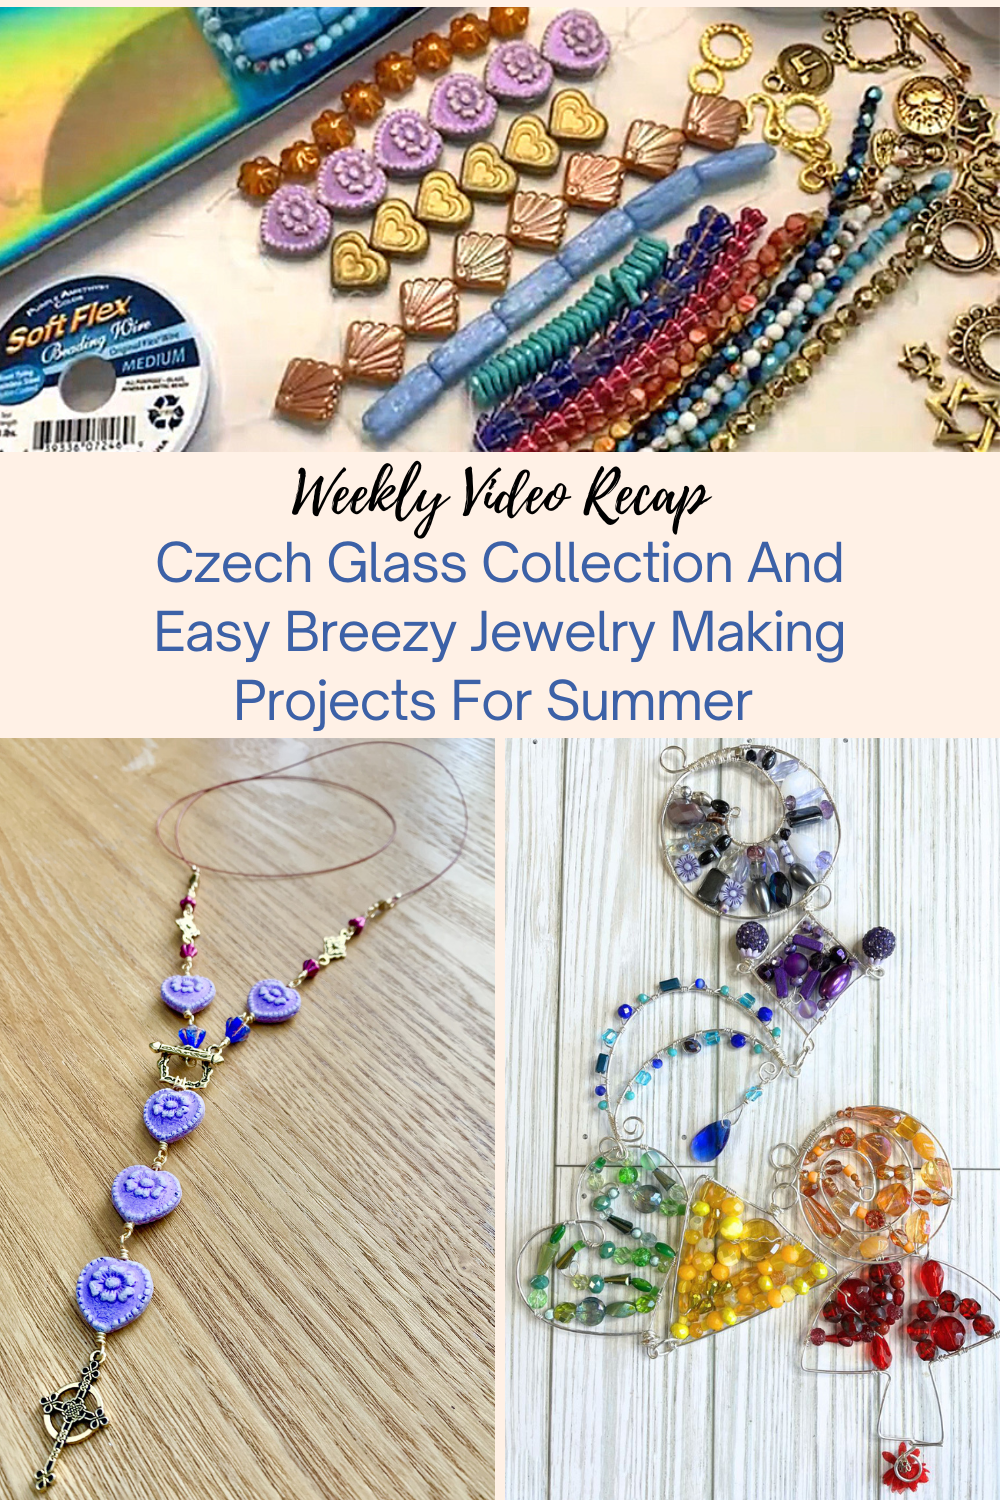 Czech Glass Collection And Easy Breezy Jewelry Making Projects For Summer Collage